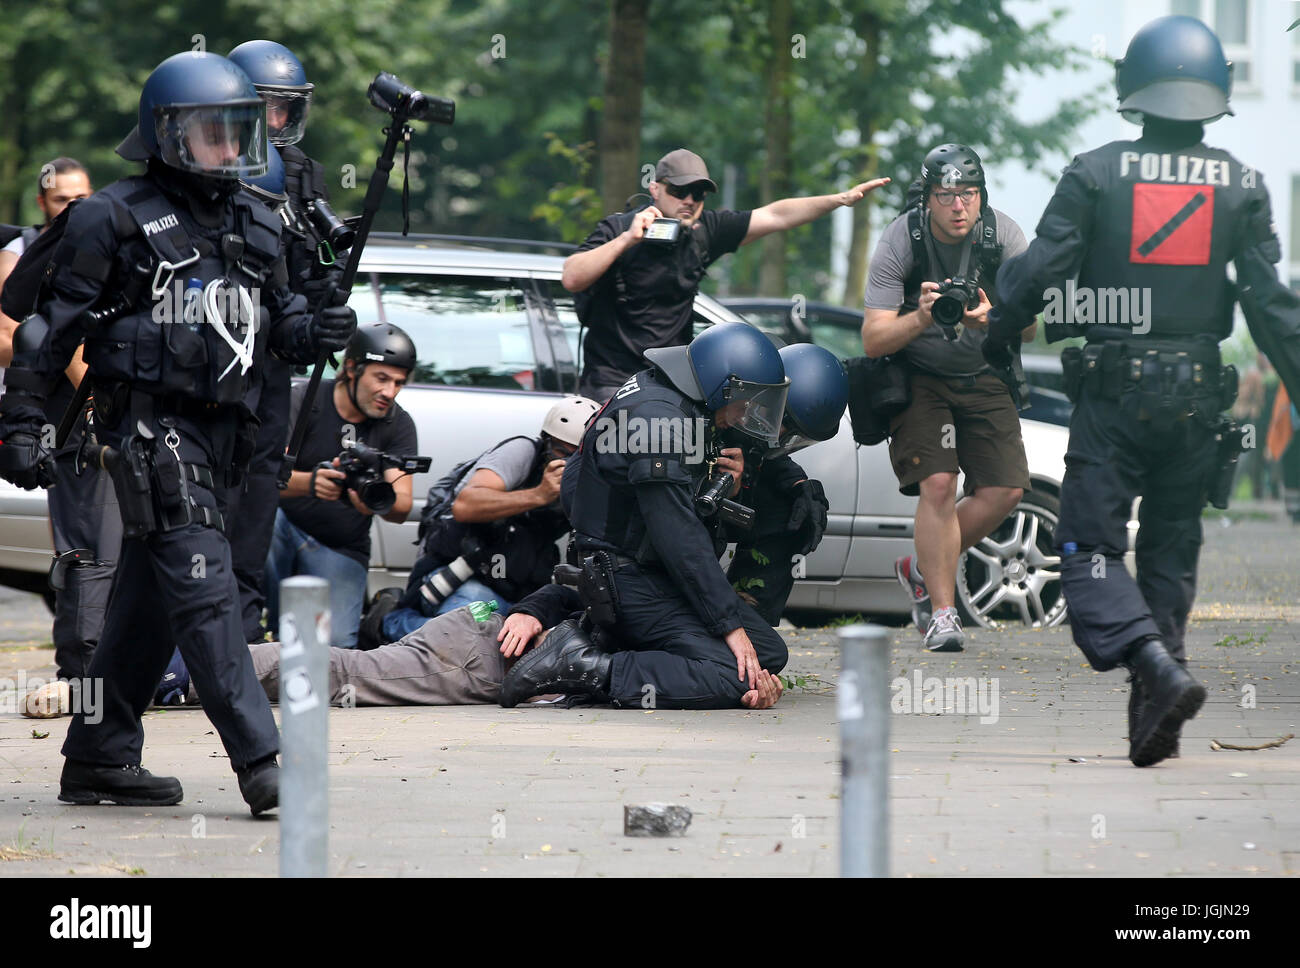 Hamburg, Germany. 7th July, 2017. Policemen arrest an activist while journalists watch near Landungsbruecken station in Hamburg, Germany, 7 July 2017. The heads of the governments of the G20 group of countries are meeting in Hamburg on the 7-8 July 2017. Photo: Sebastian Willnow/dpa/Alamy Live News Stock Photo